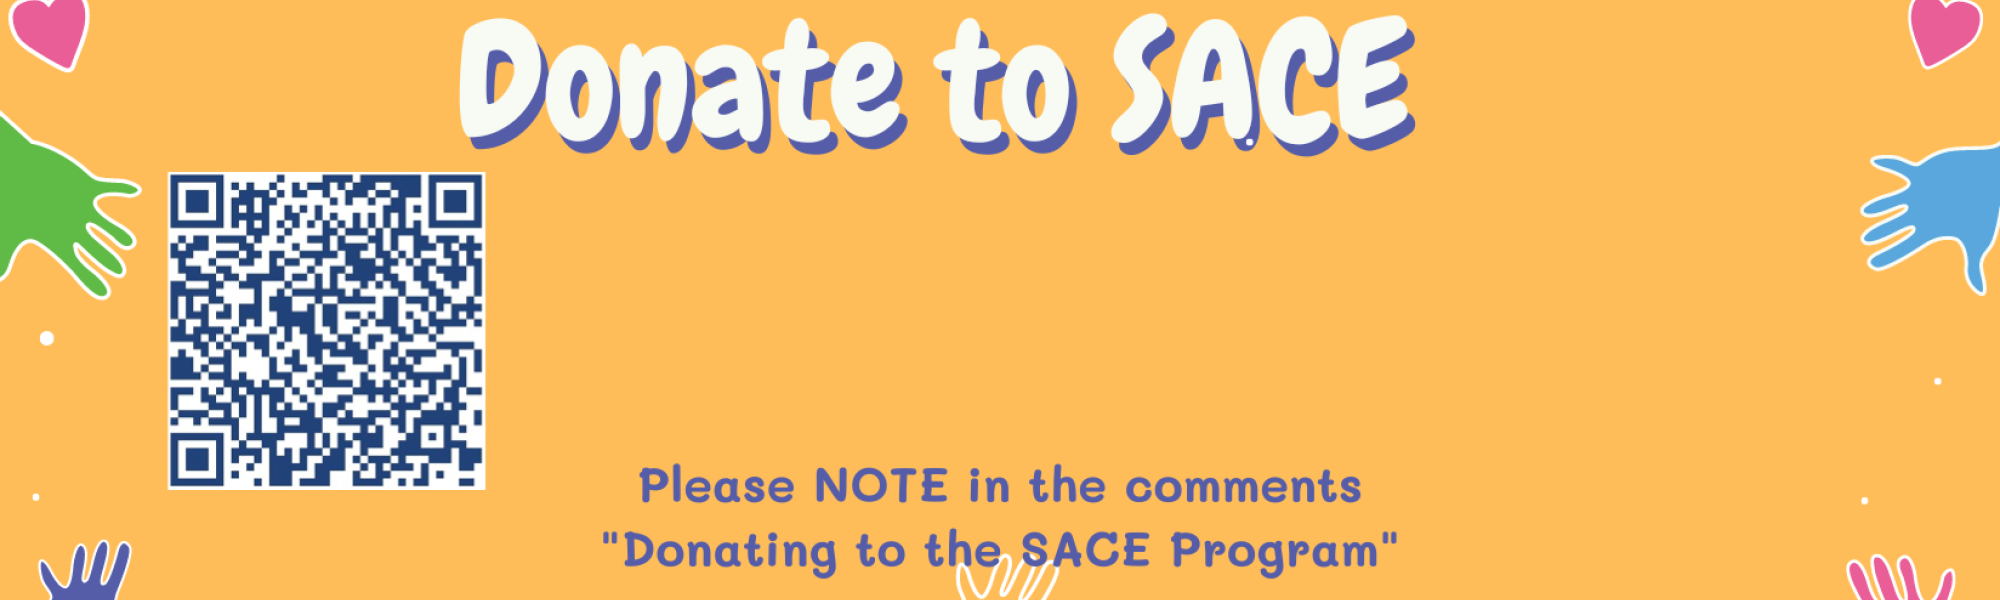 SACE Donation Graphic 10-22